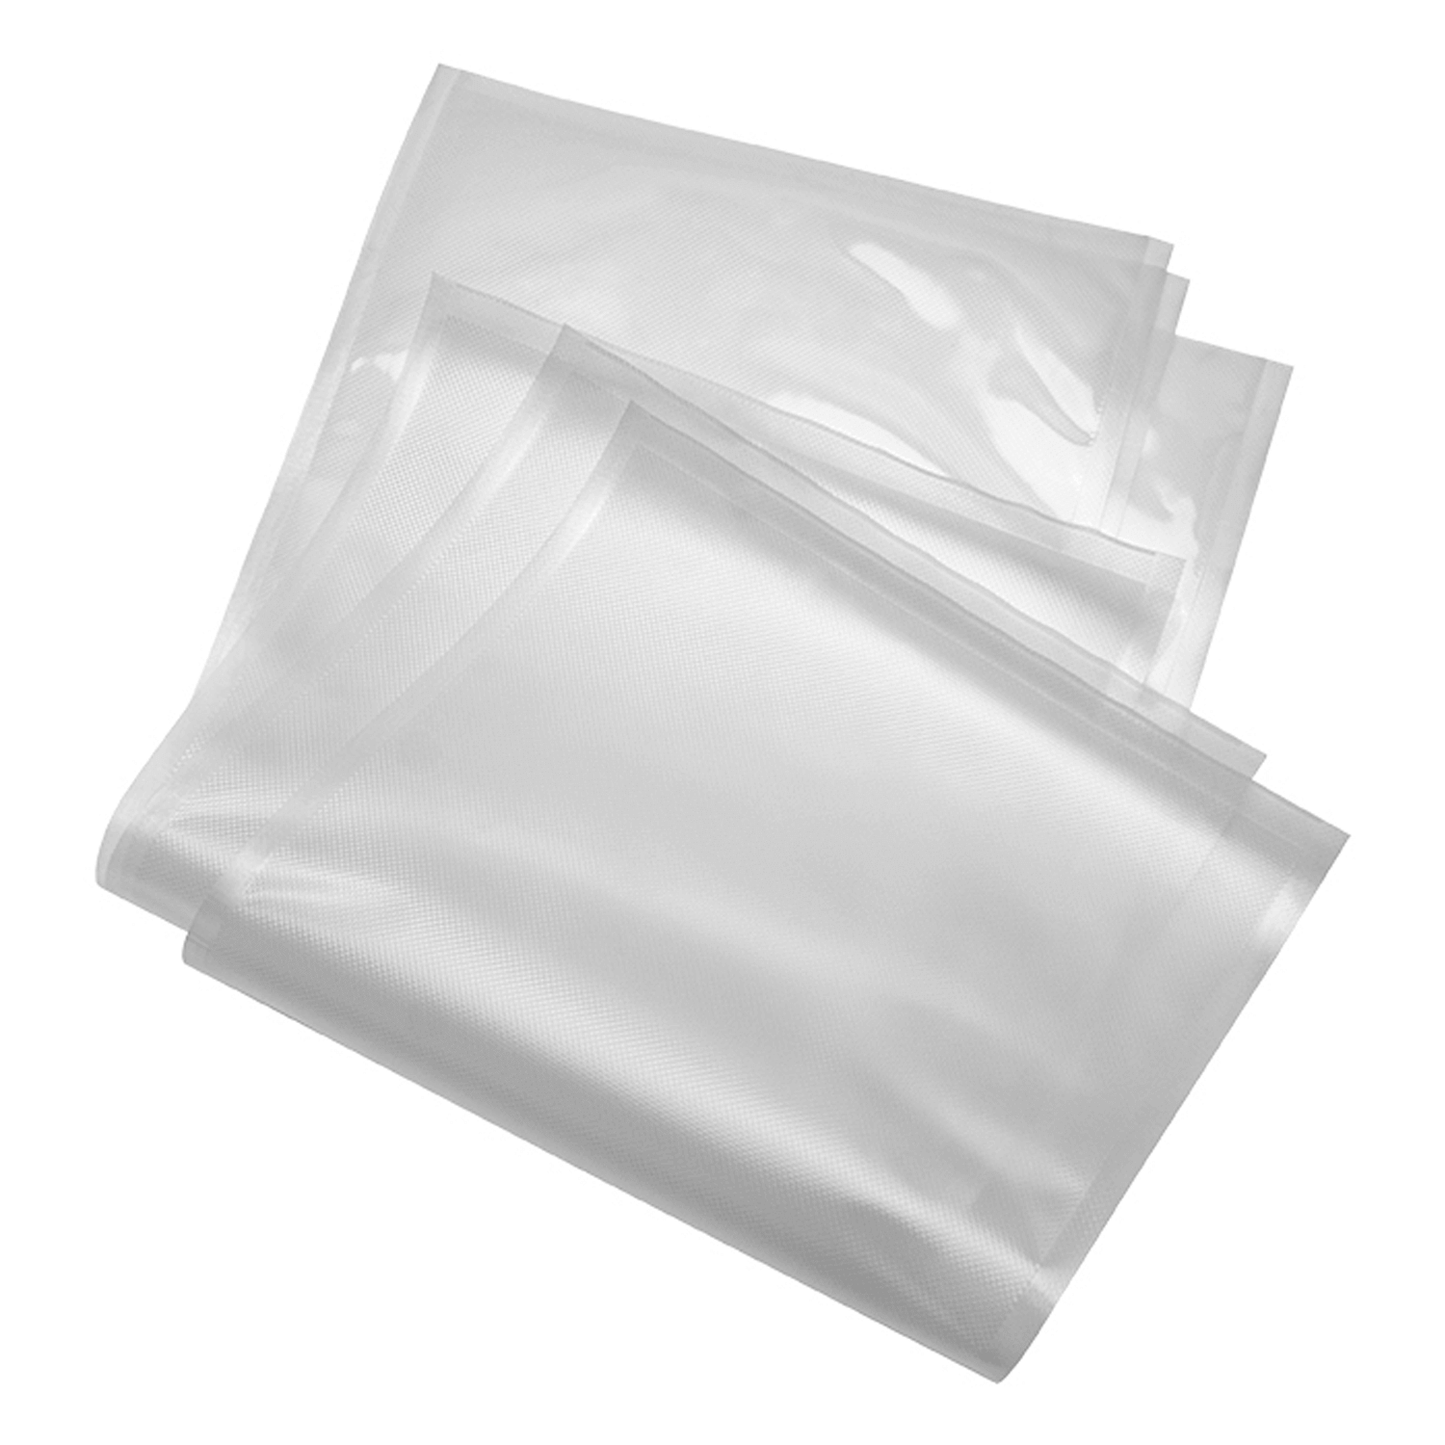 ArmorVac 15"x20" 5mil Precut Vacuum Seal Bags All Clear (100 Pack) 131520CR Harvest & Extraction